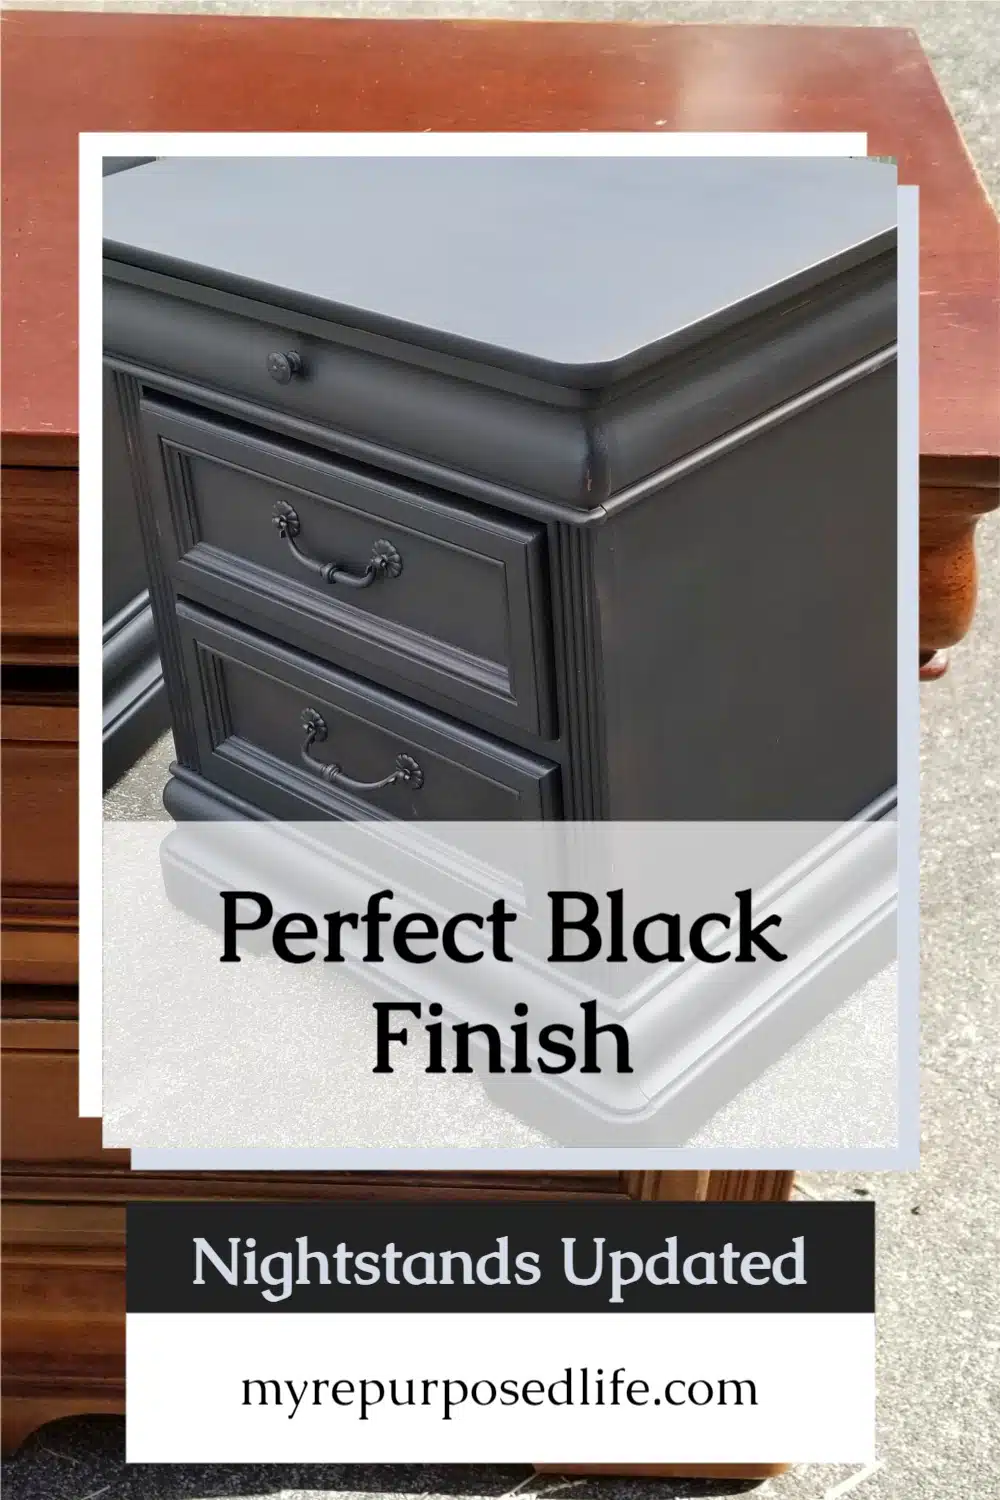 These vintage black nightstands got a second chance to match a new bedroom suite. A little paint and gentle distressing make them match the new Passages bed. #MyRepurposedLife #repurposed #furniture #nightstands #makeover #waxing via @repurposedlife